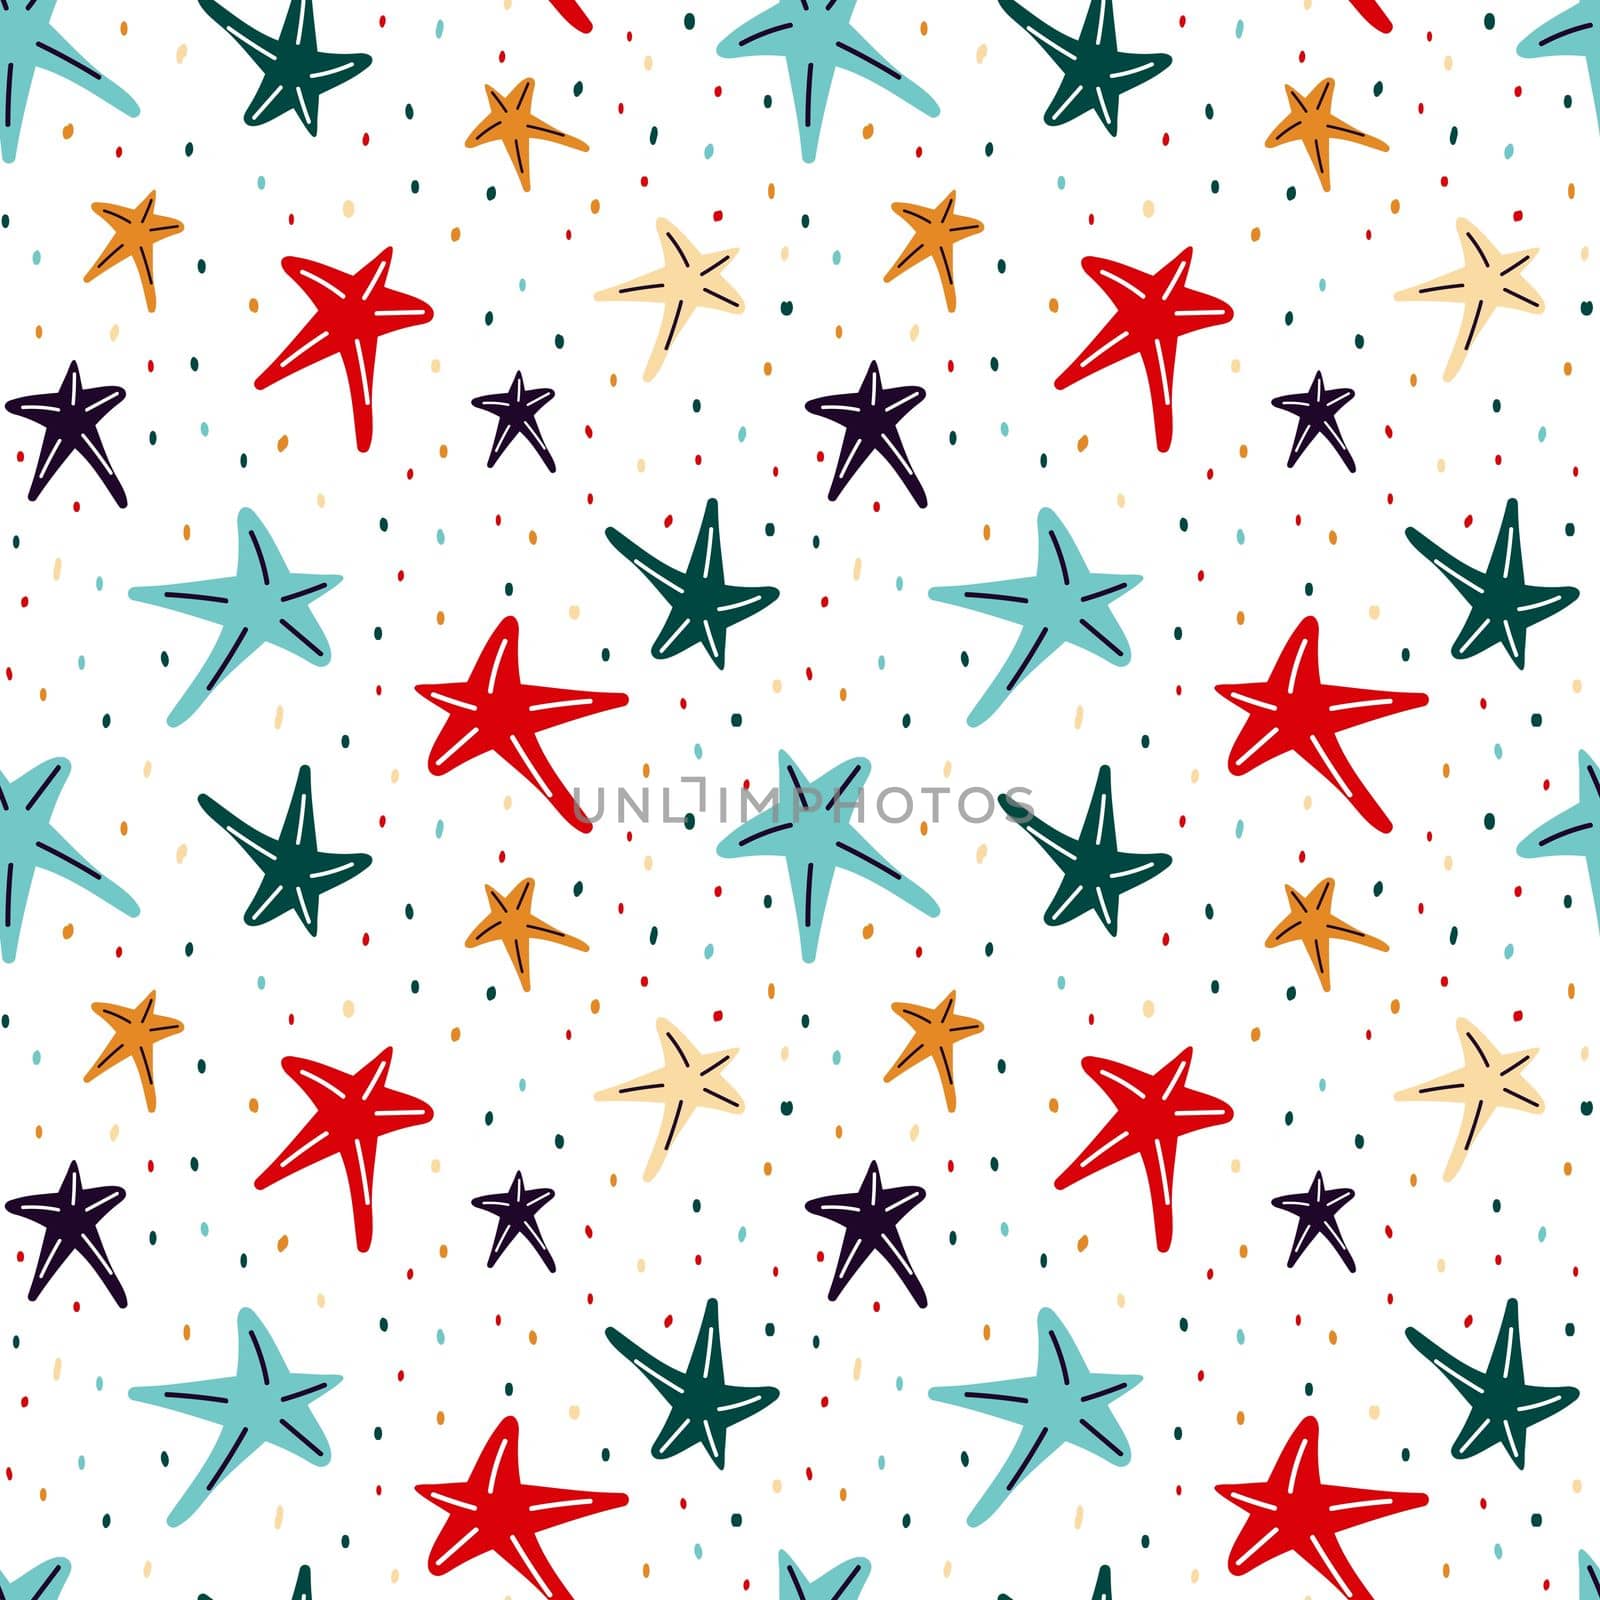 Sea stars seamless background by Dustick